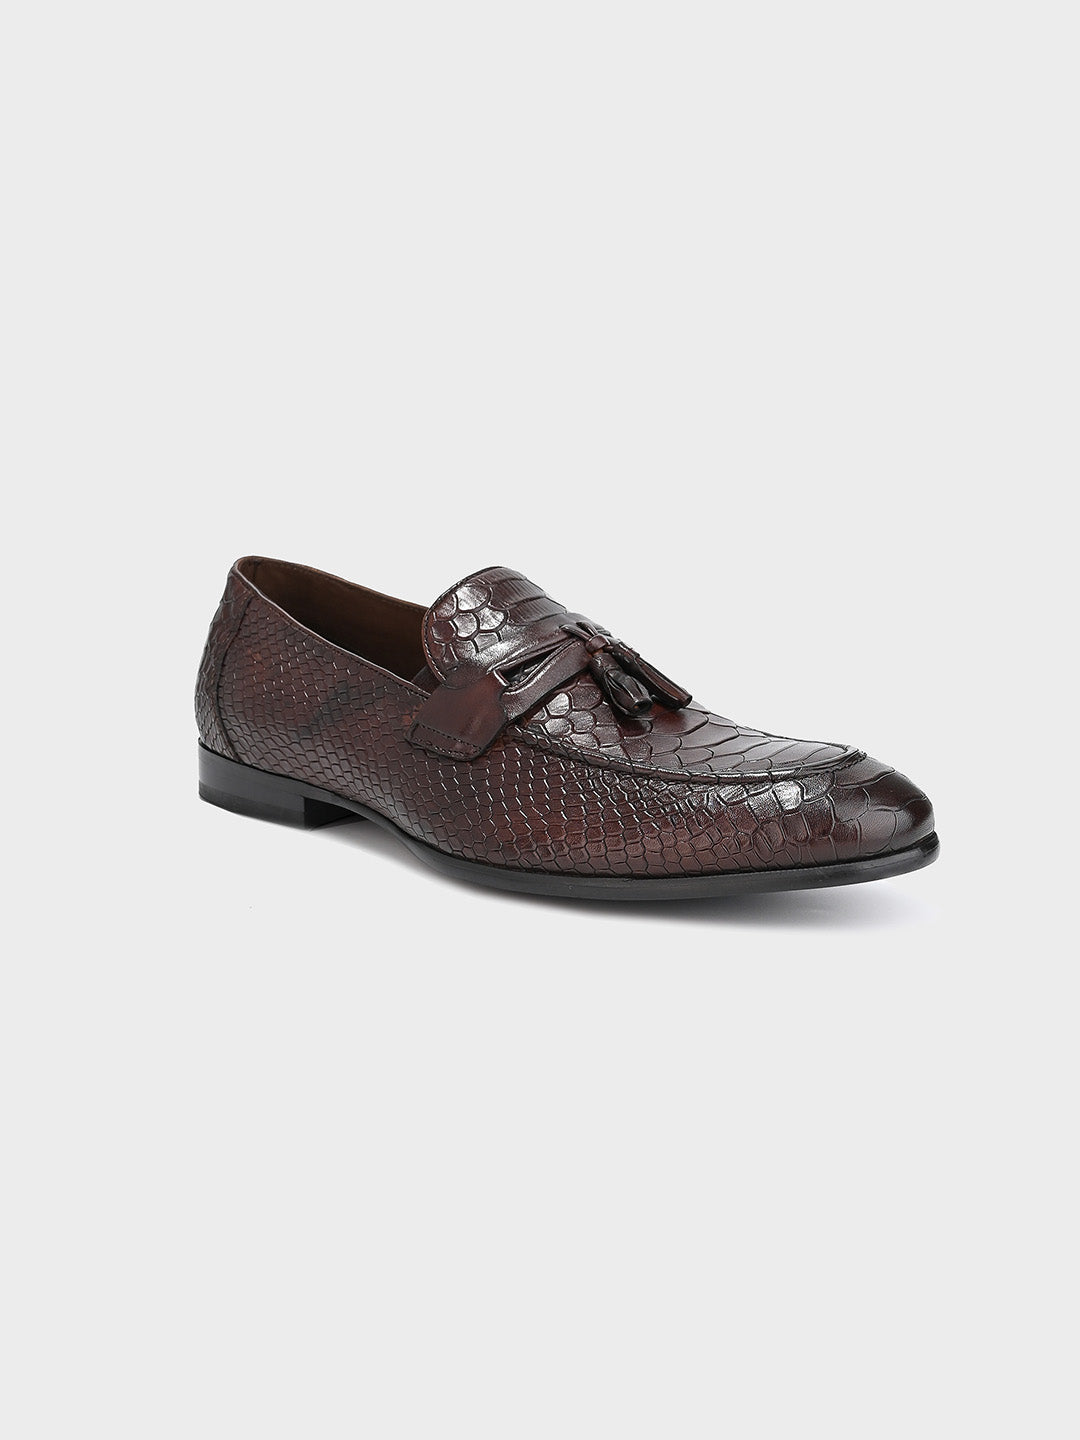 Classic Brown Leather Men's Tassel Slip-On Shoes